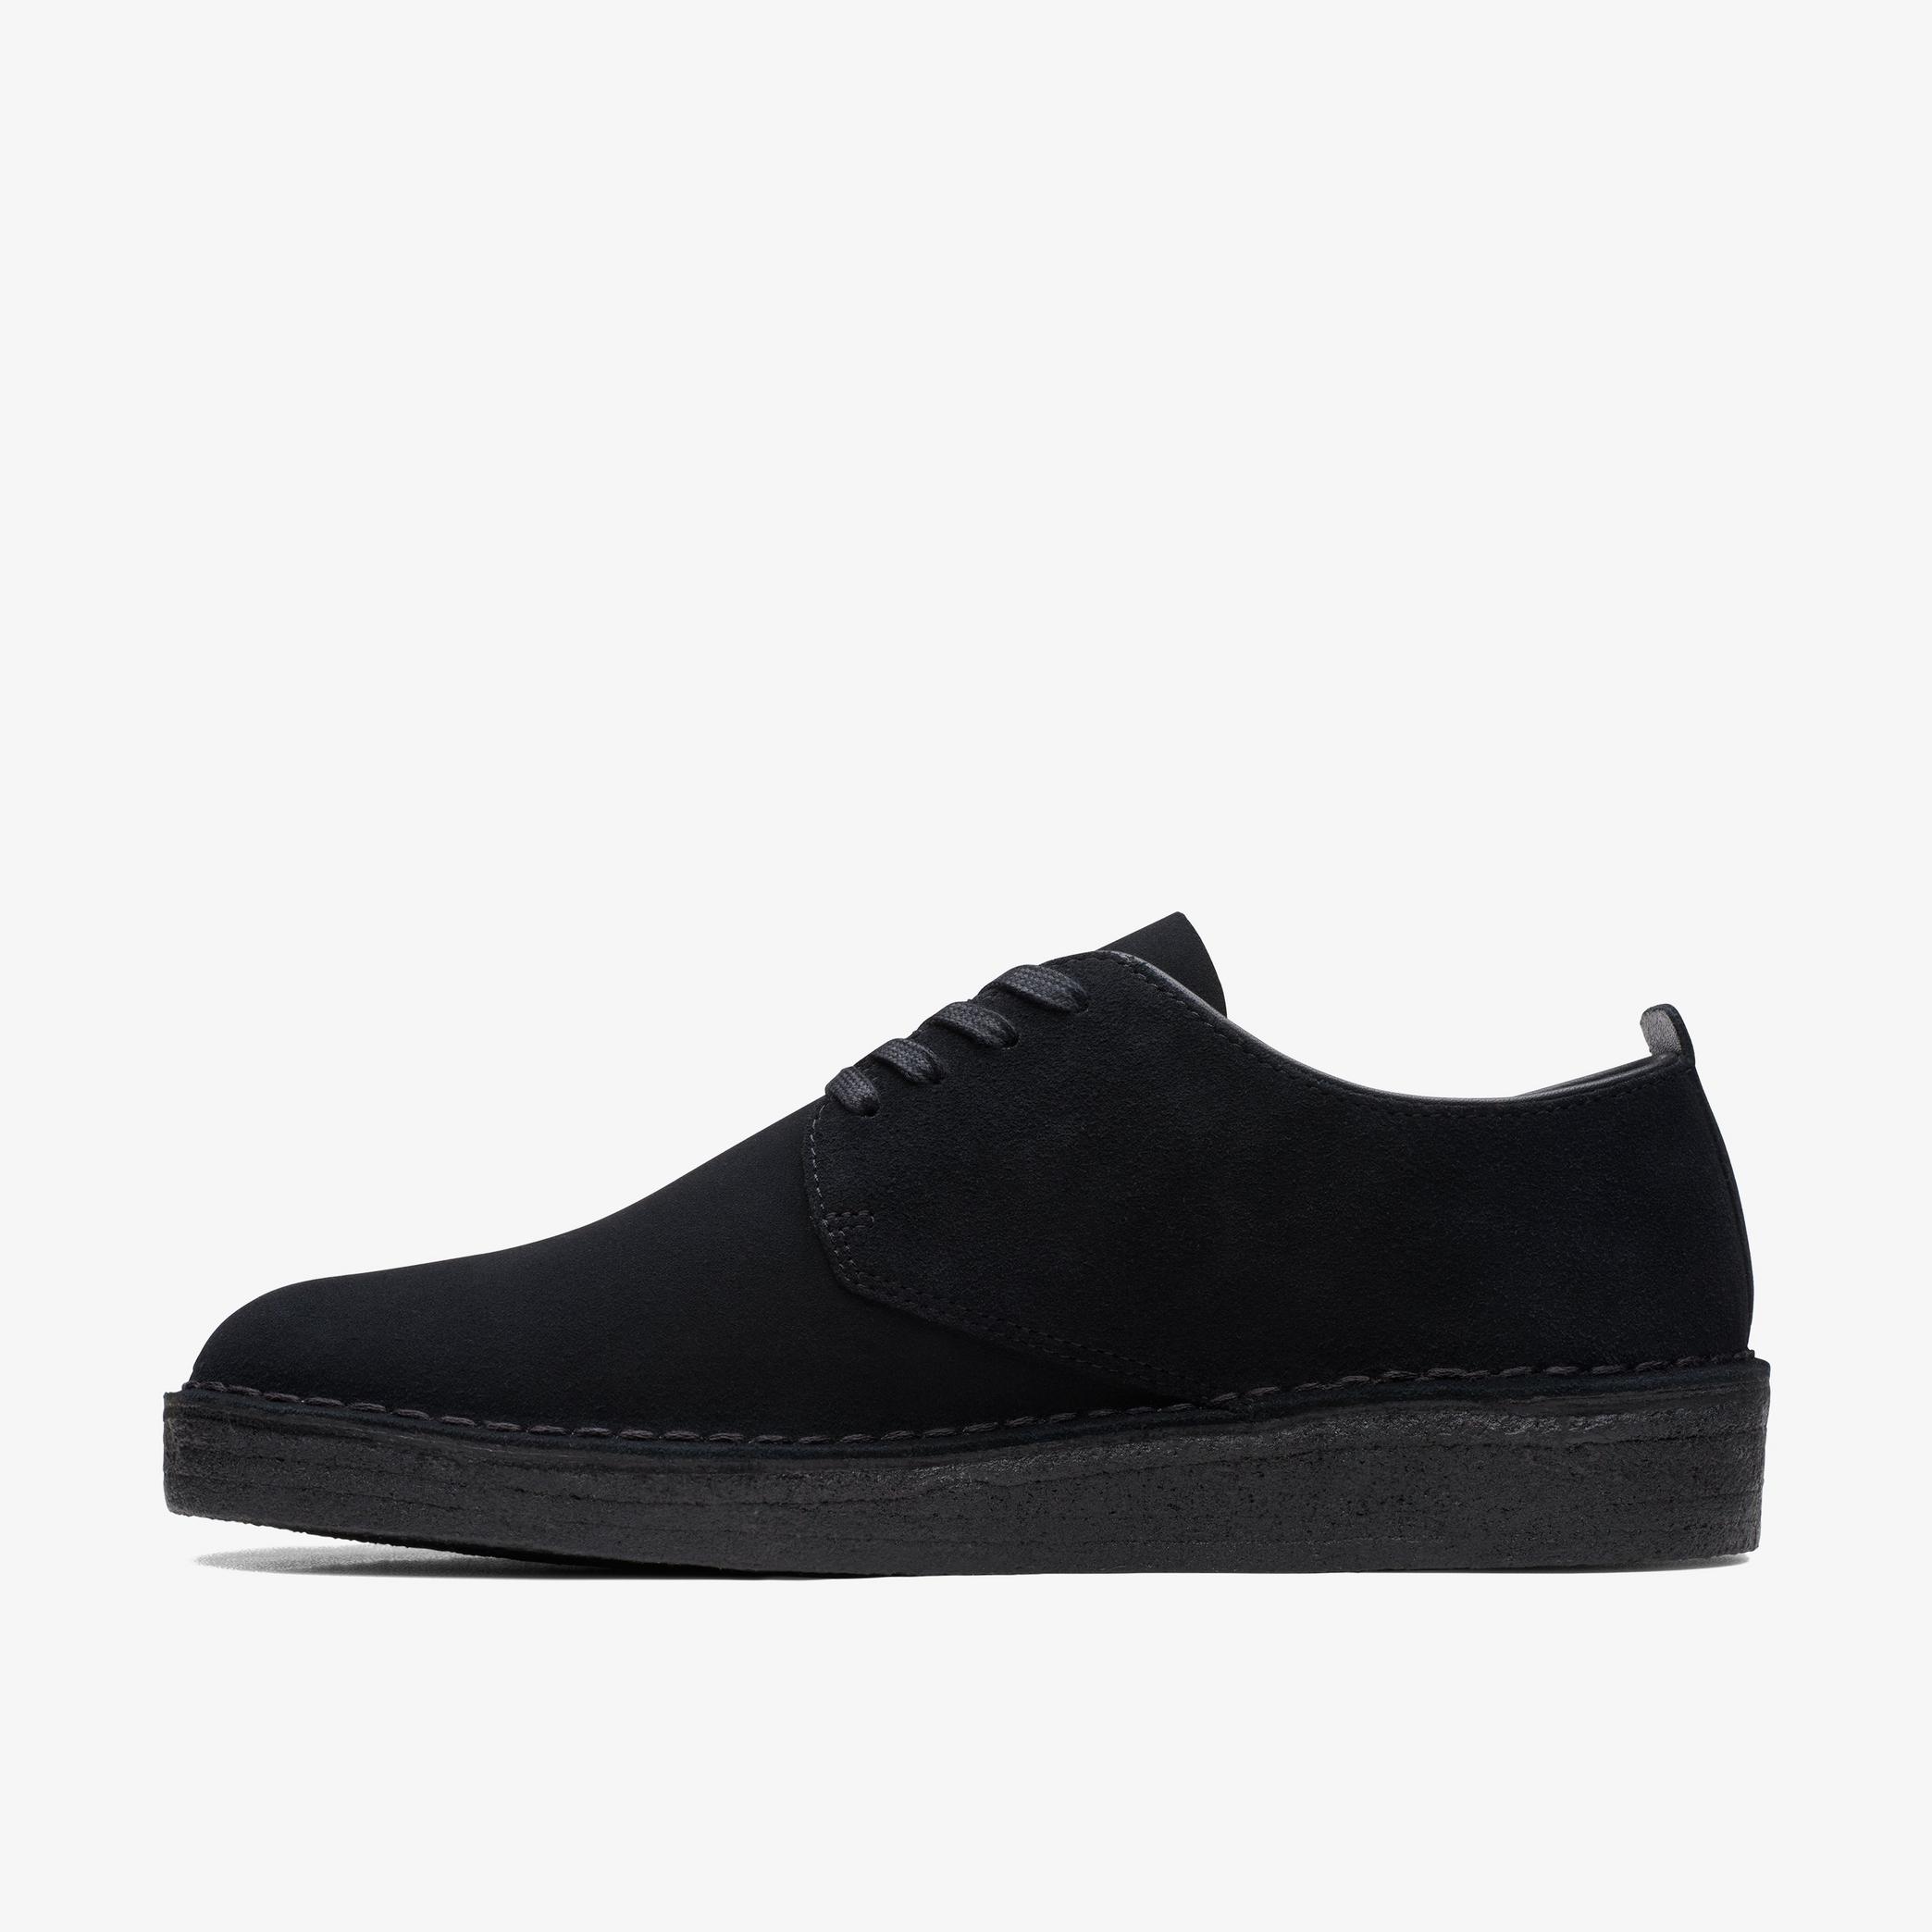 Coal London Black Suede Desert Boots, view 2 of 7